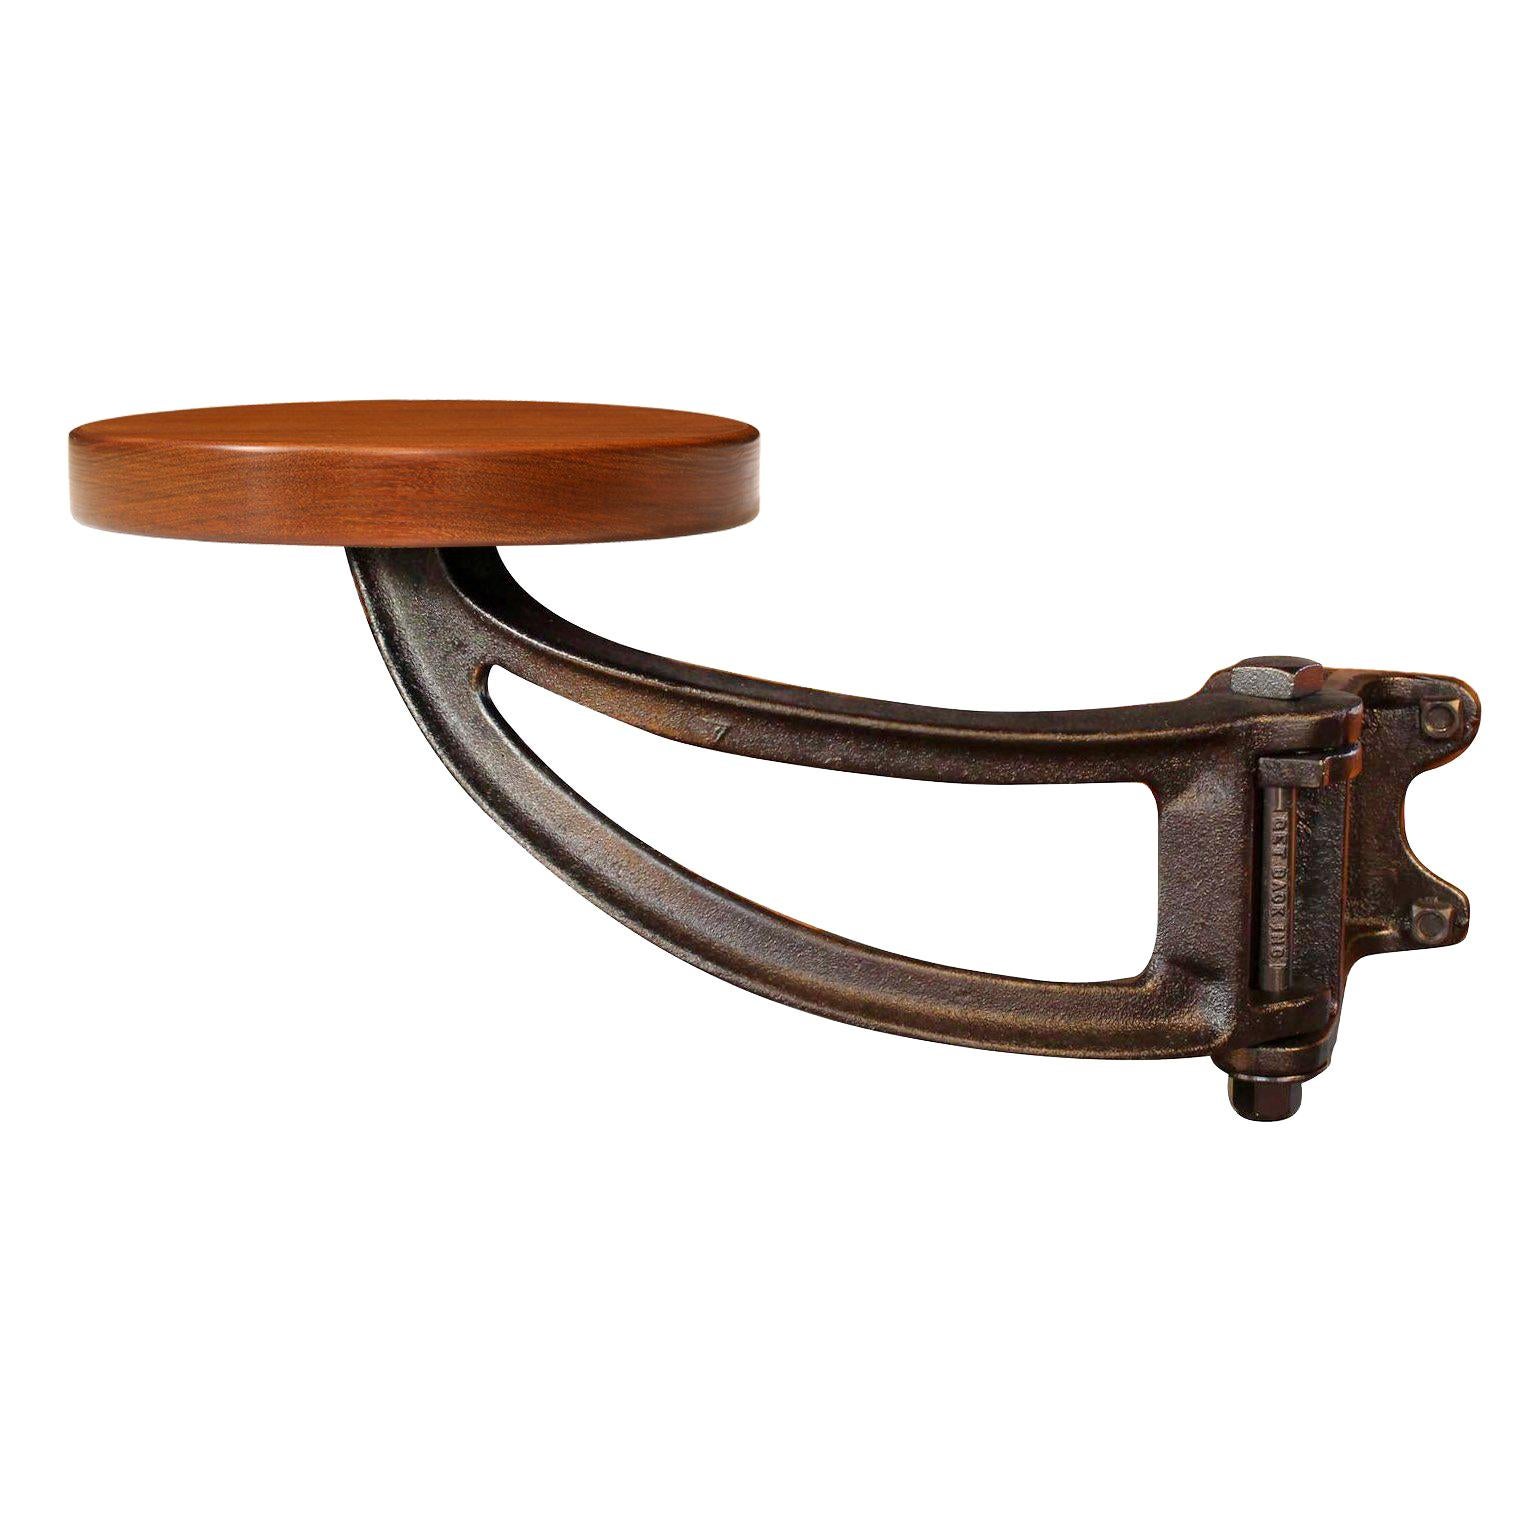 The Original Swing-Out Seat with Ipe